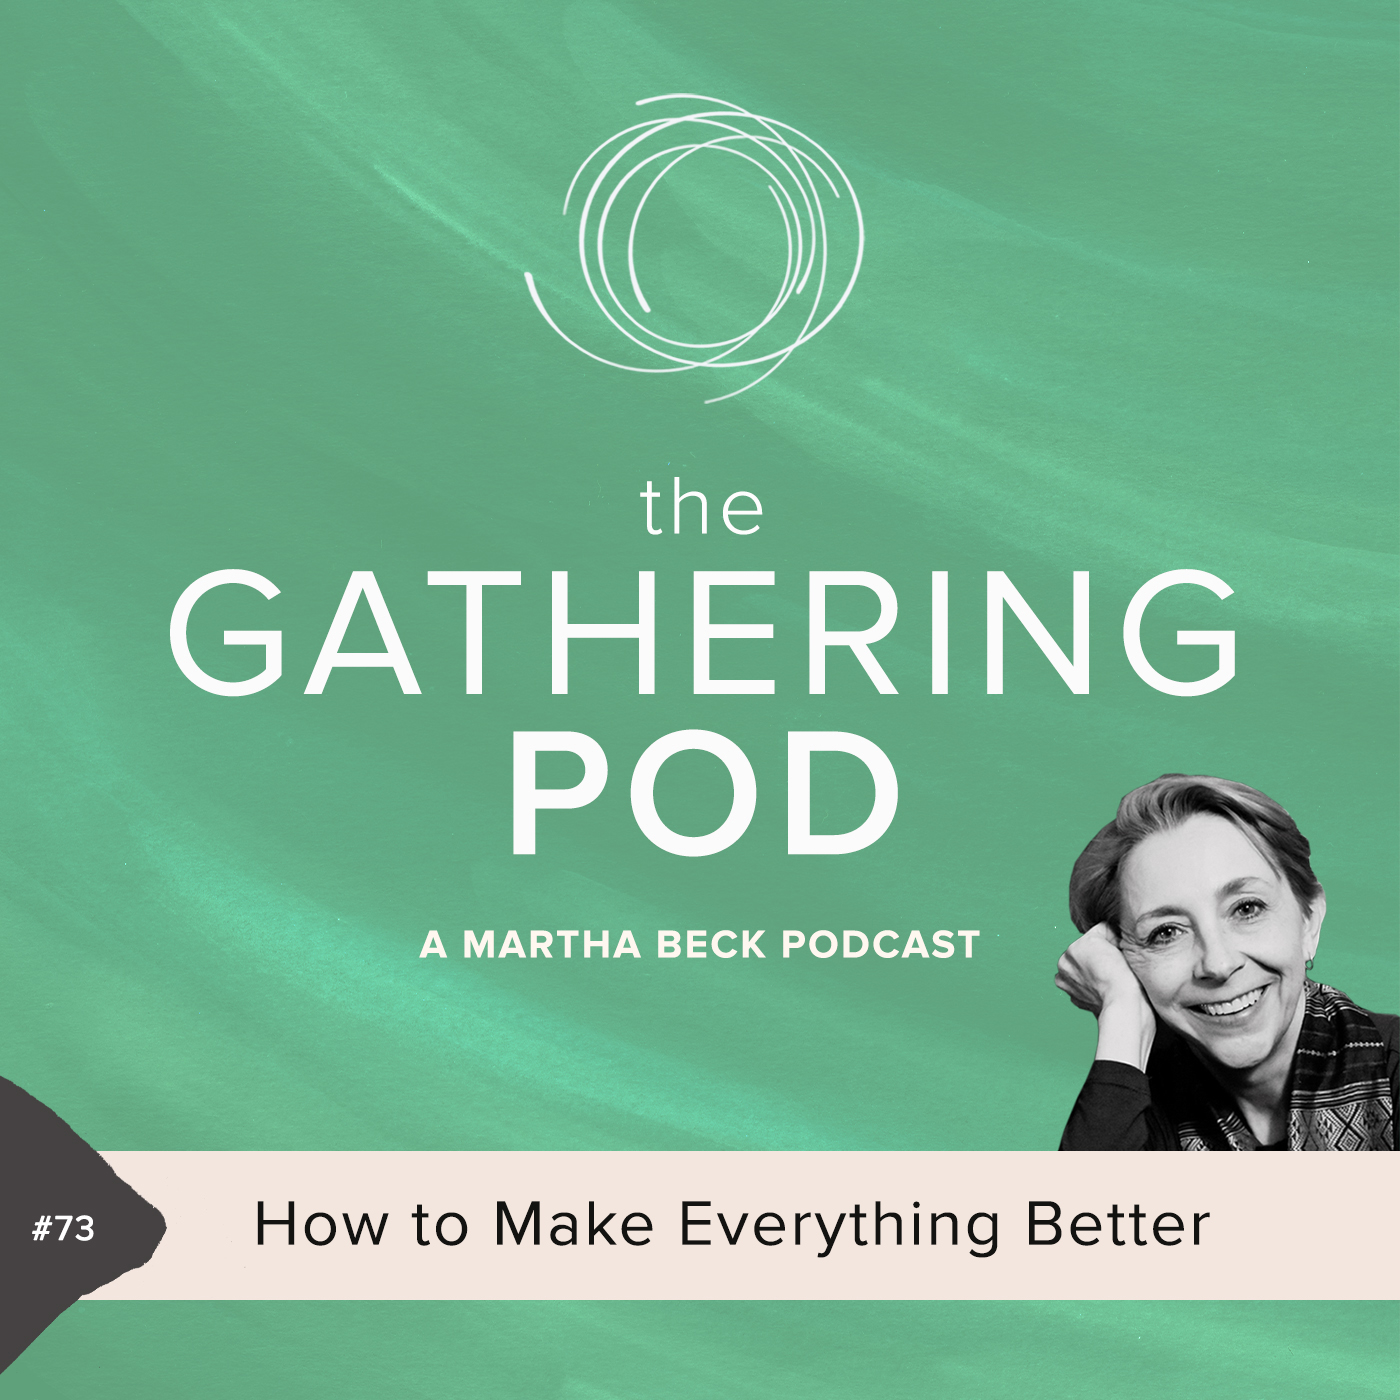 Image for The Gathering Pod A Martha Beck Podcast Episode #73 How to Make Everything Better